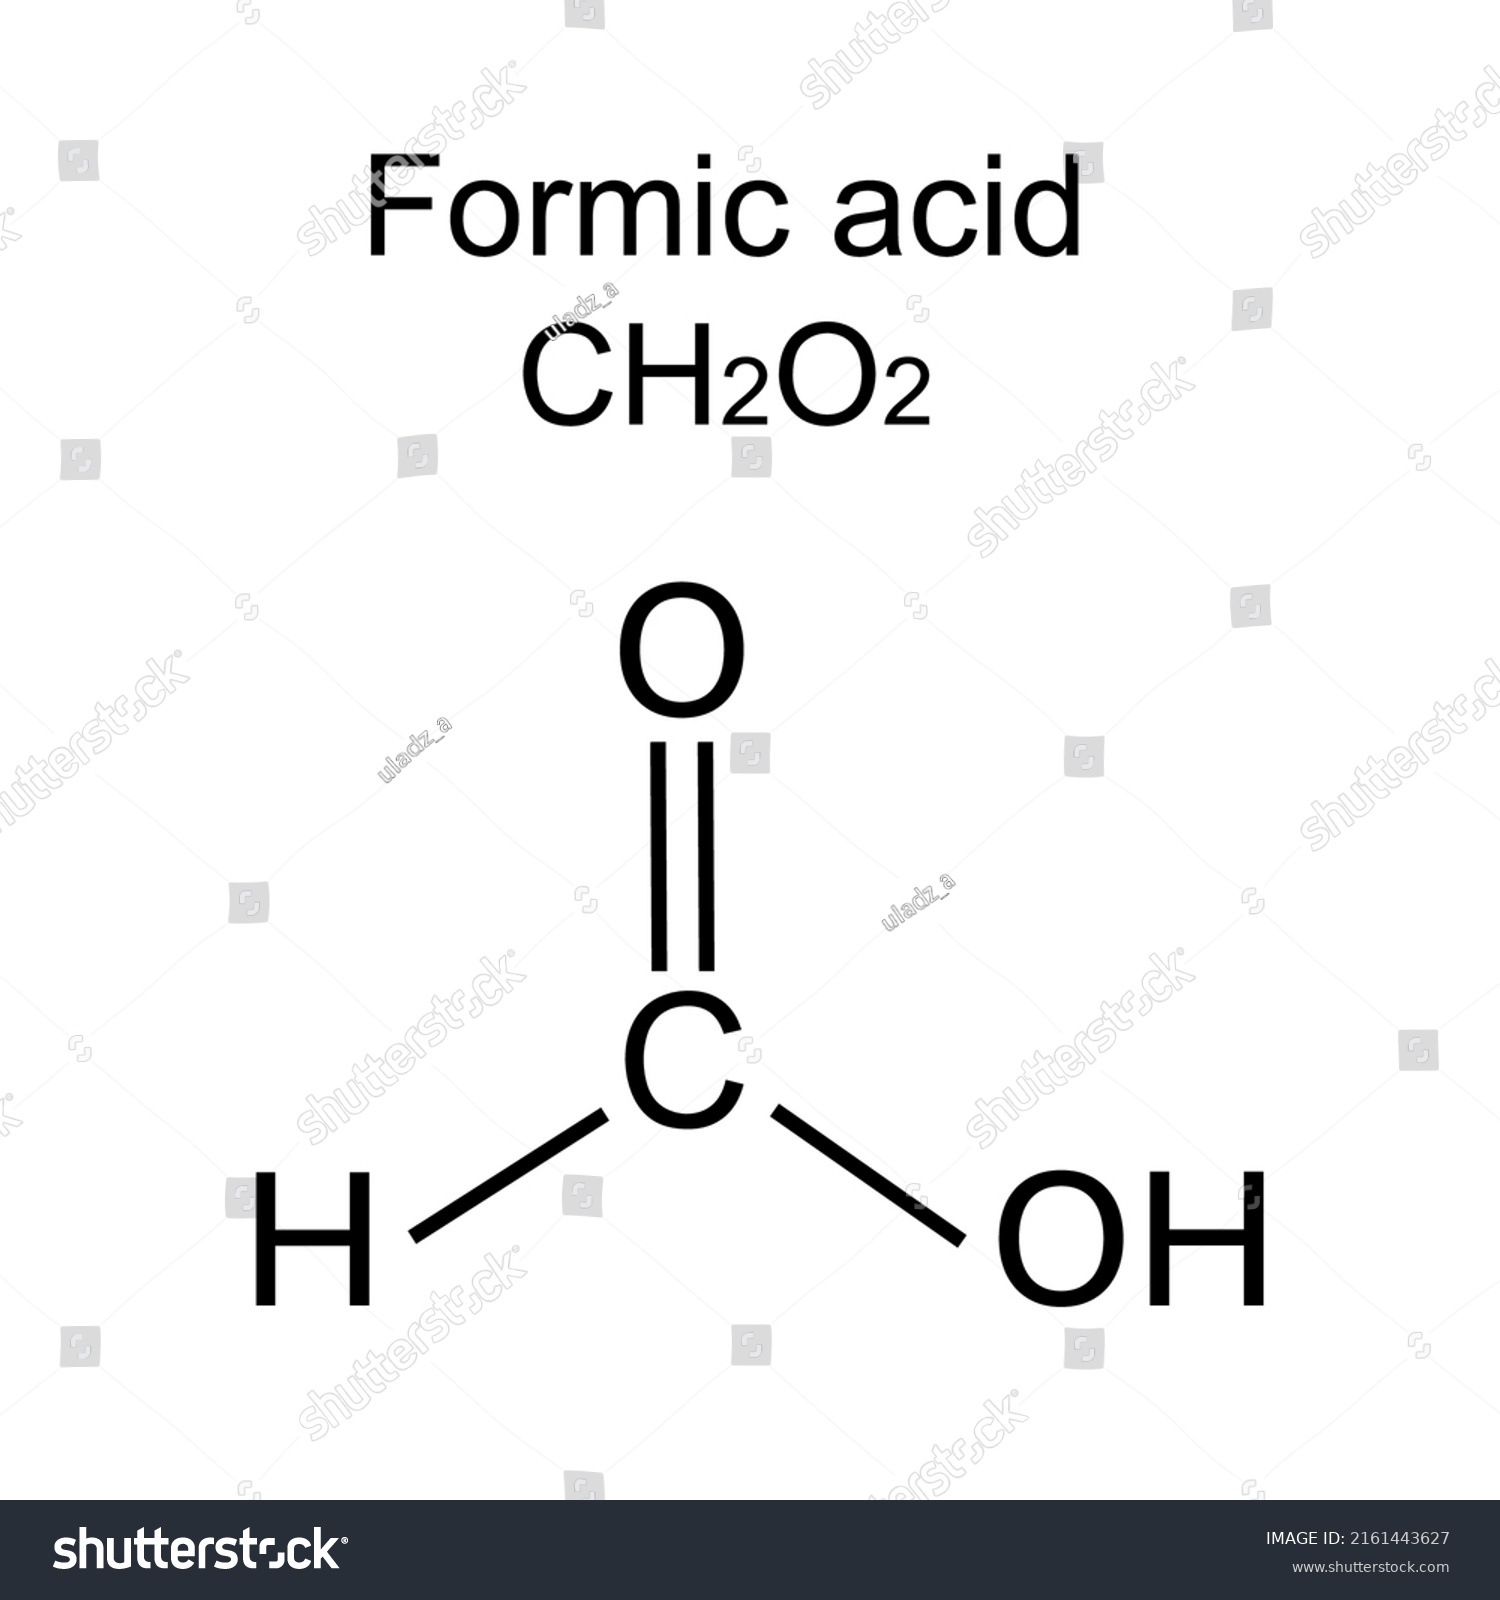 Chemical Structural Formula Formic Acid Stock Vector (Royalty Free ...